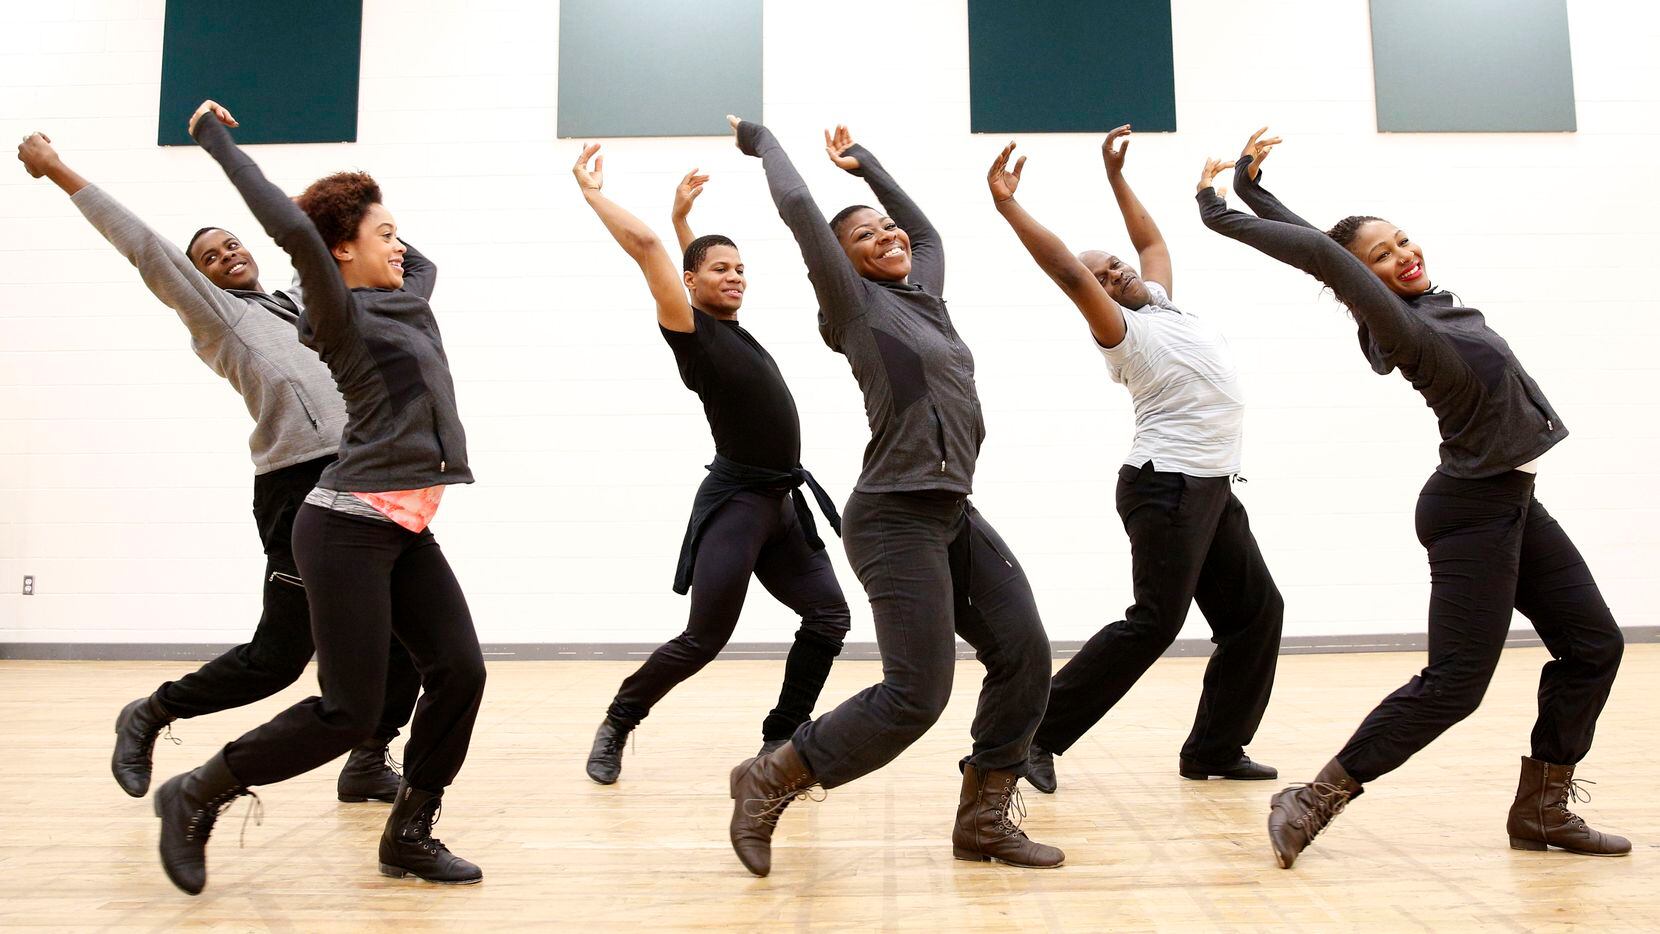 Dallas Black Dance Theatre II dancers perform during a rehearsal for The Dallas Opera's 'Show Boat' in Dallas on March 17, 2016. Many North Texas artists in 2020 are struggling for financial survival in the wake of the coronavirus crisis, which has shut down venues and canceled performances.